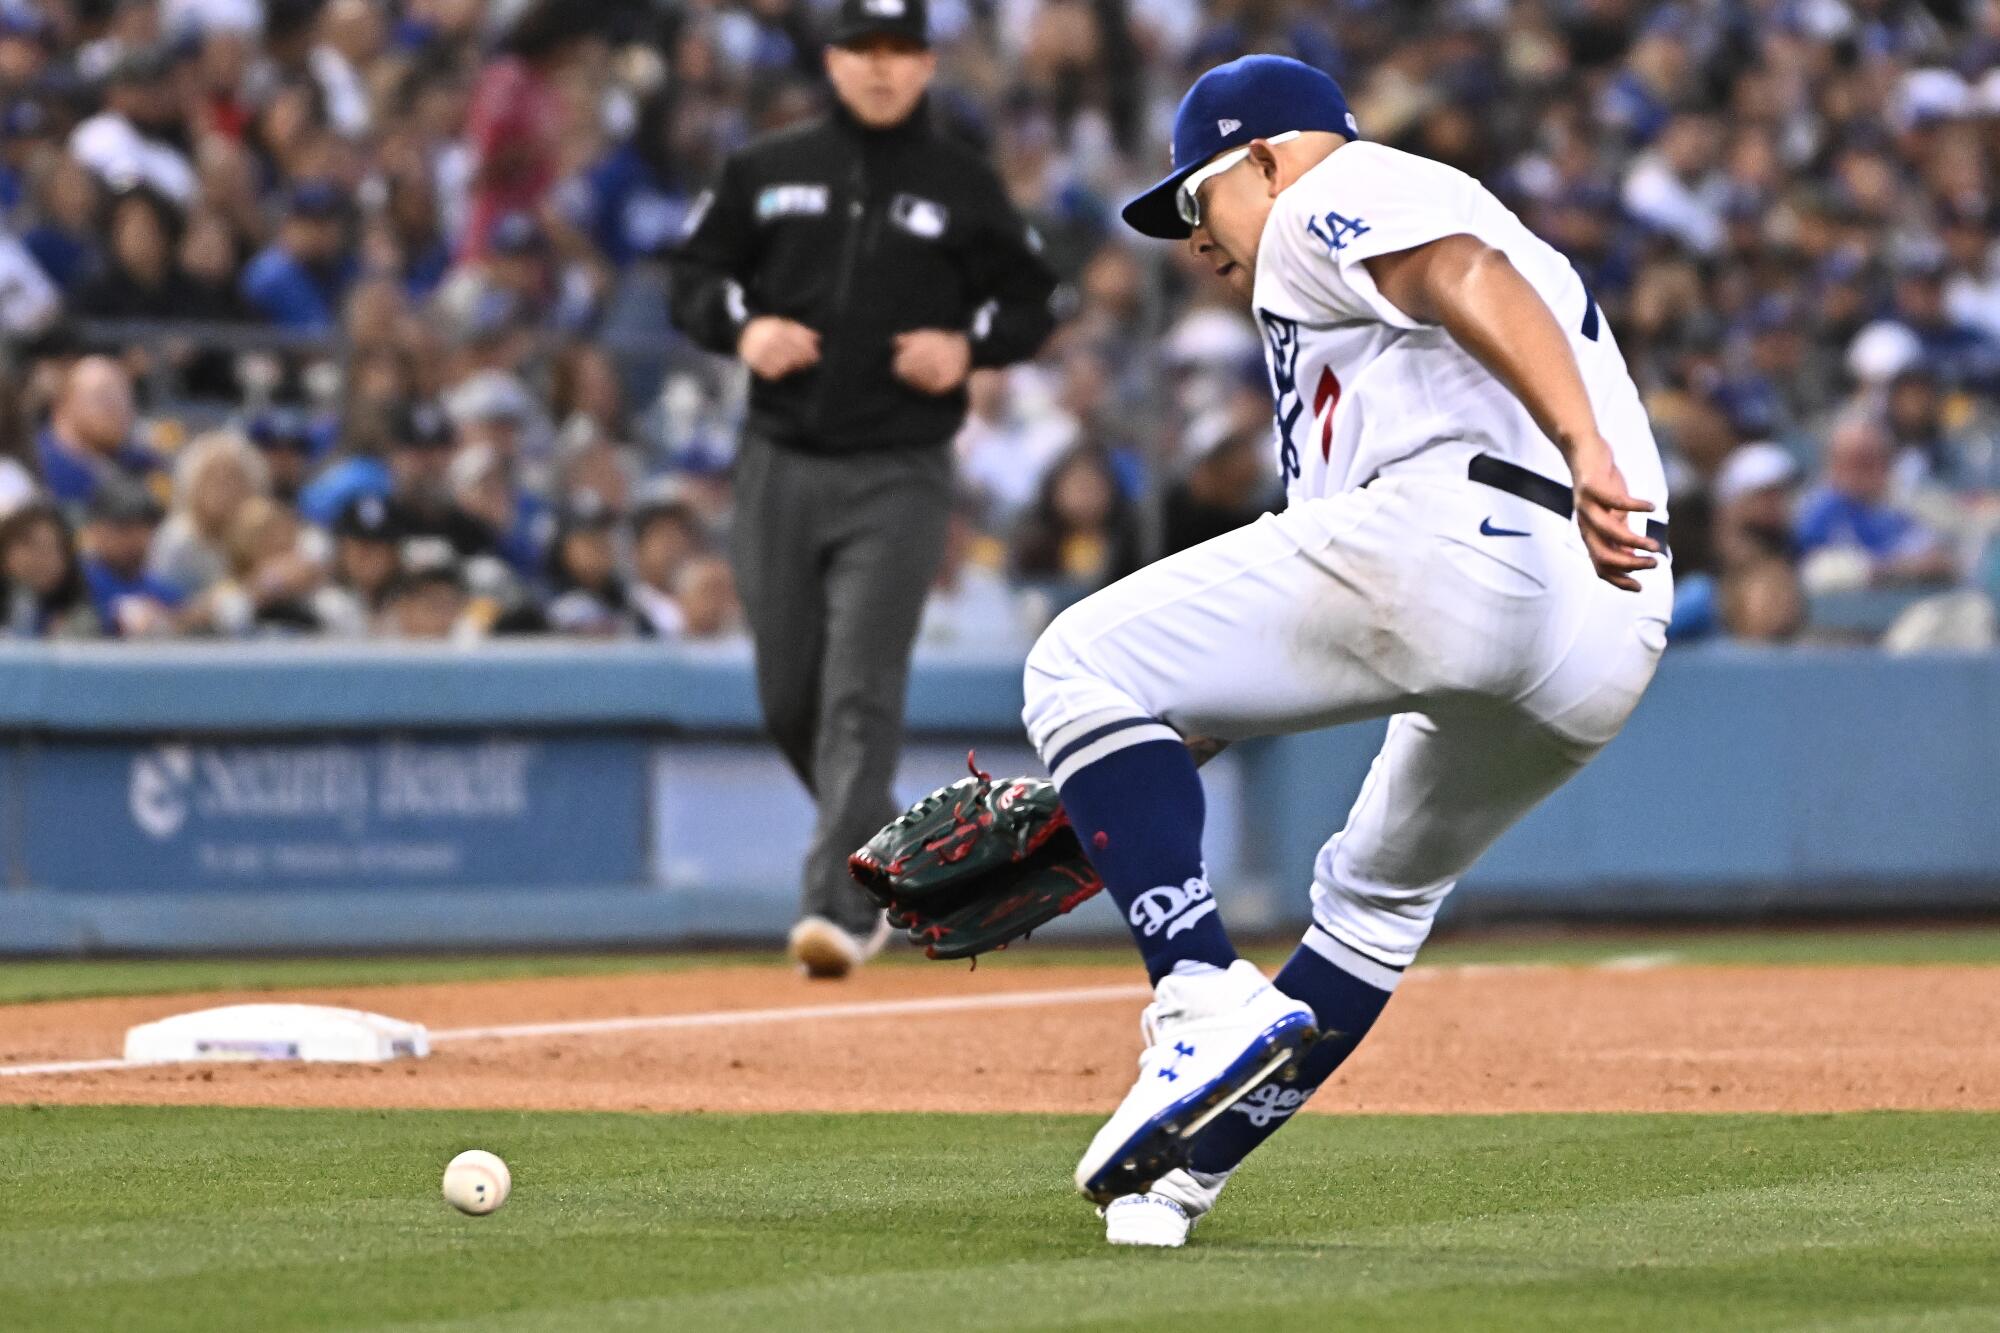 Julio Urias fields the ball on a single by Michael Chavis in the third inning.